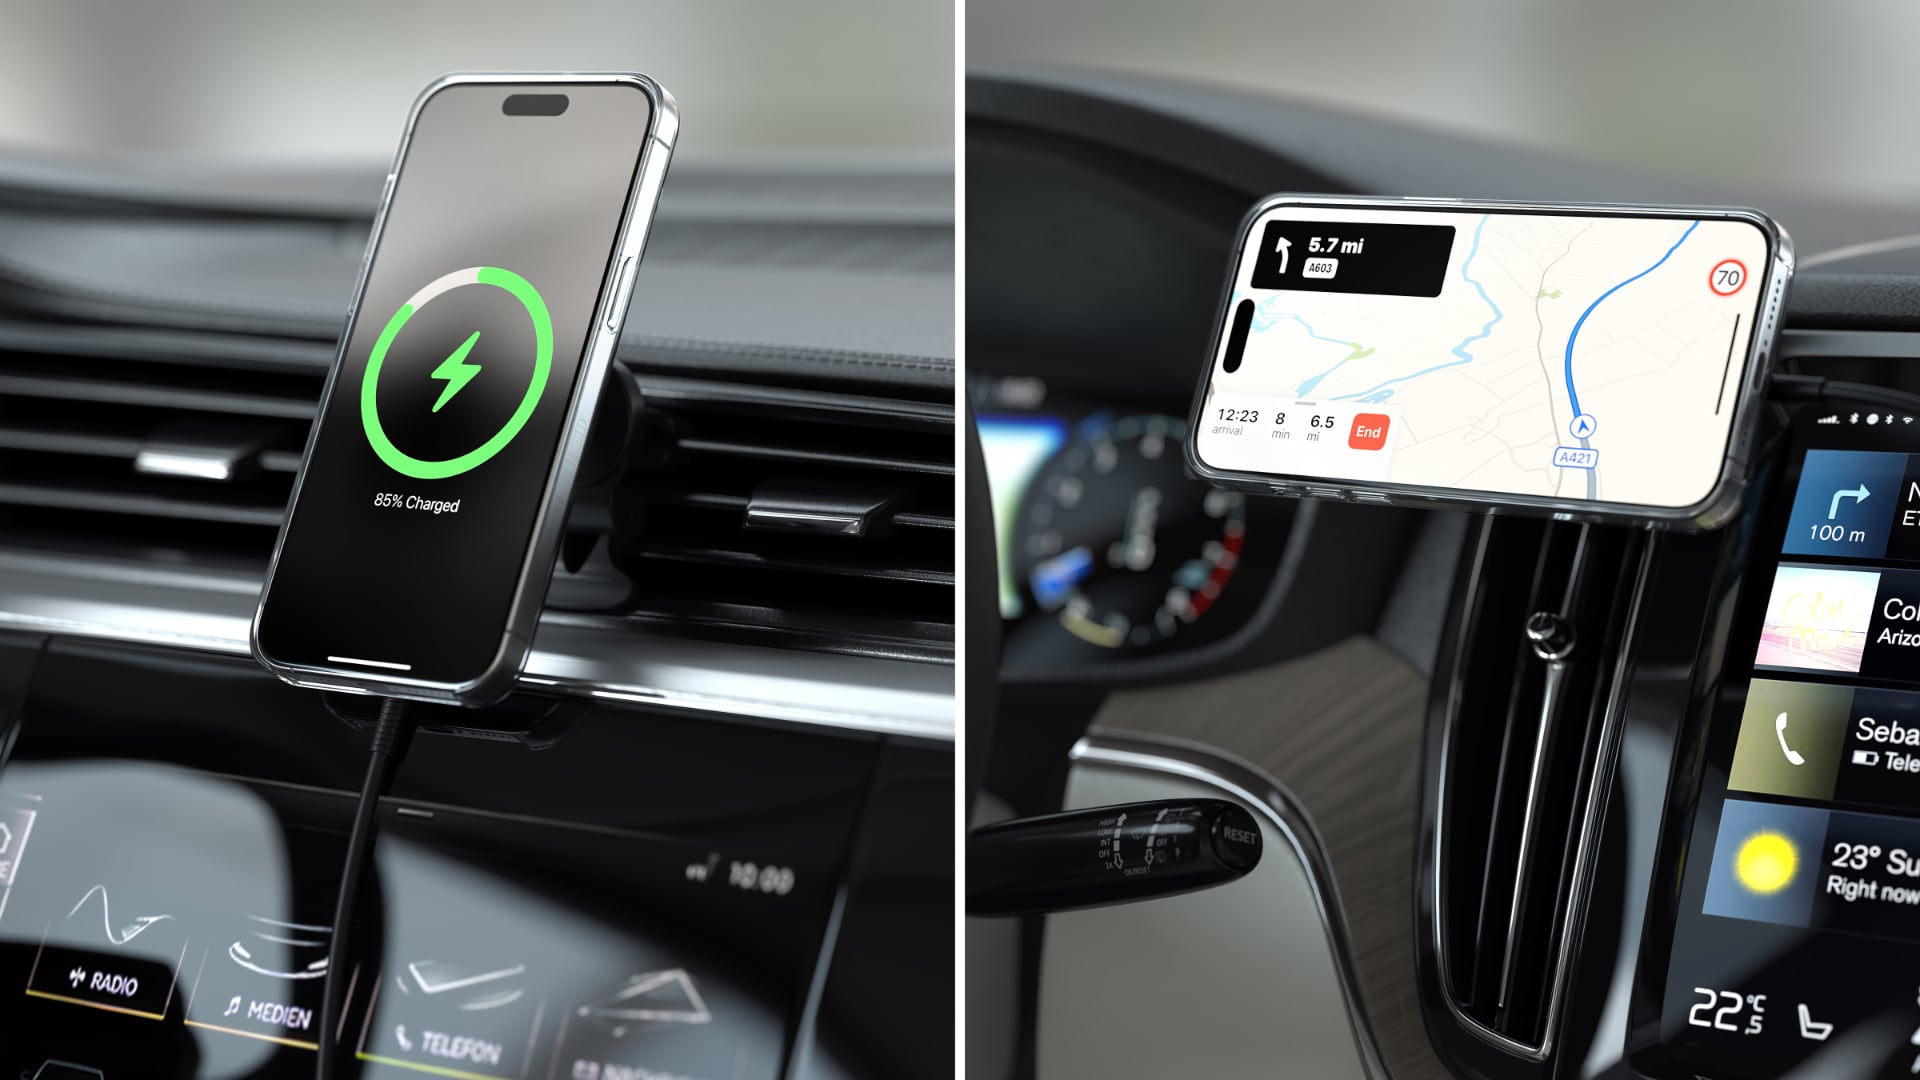 Side by side photos of Satechi's Qi2 car charger with an iPhone charging in portrait and landscape orientation